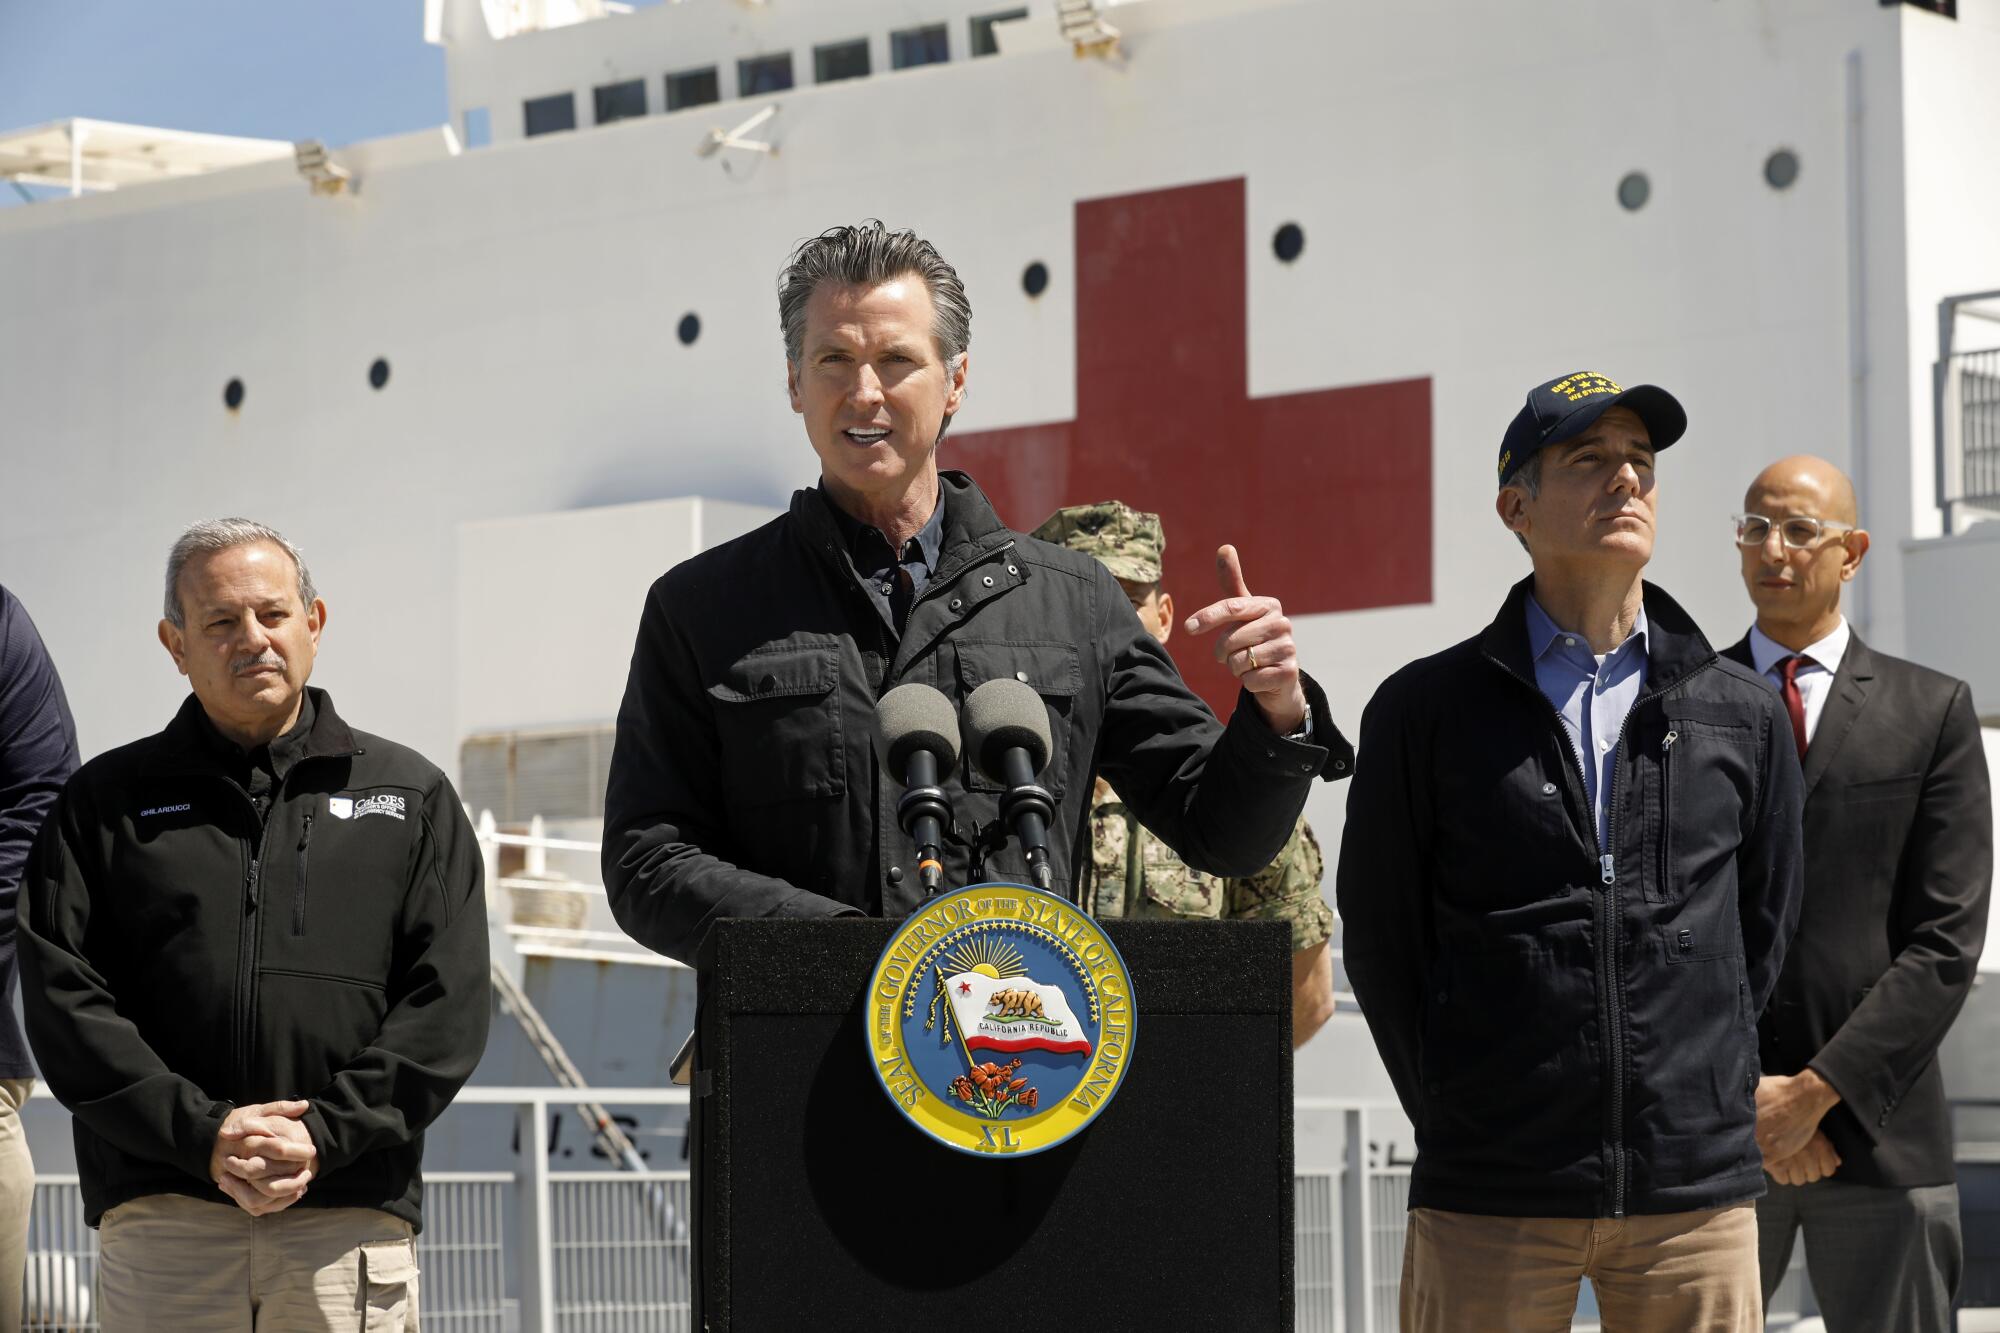 California Gov. Gavin Newsom speaks in front of the Navy hospital ship Mercy after its arrival into the Port of Los Angeles on Friday. Director Mark Ghilarducci of the Office of Emergency Services, left, L.A. Mayor Eric Garcetti and California Secretary of Health and Human Services Dr. Mark Ghaly also attended.